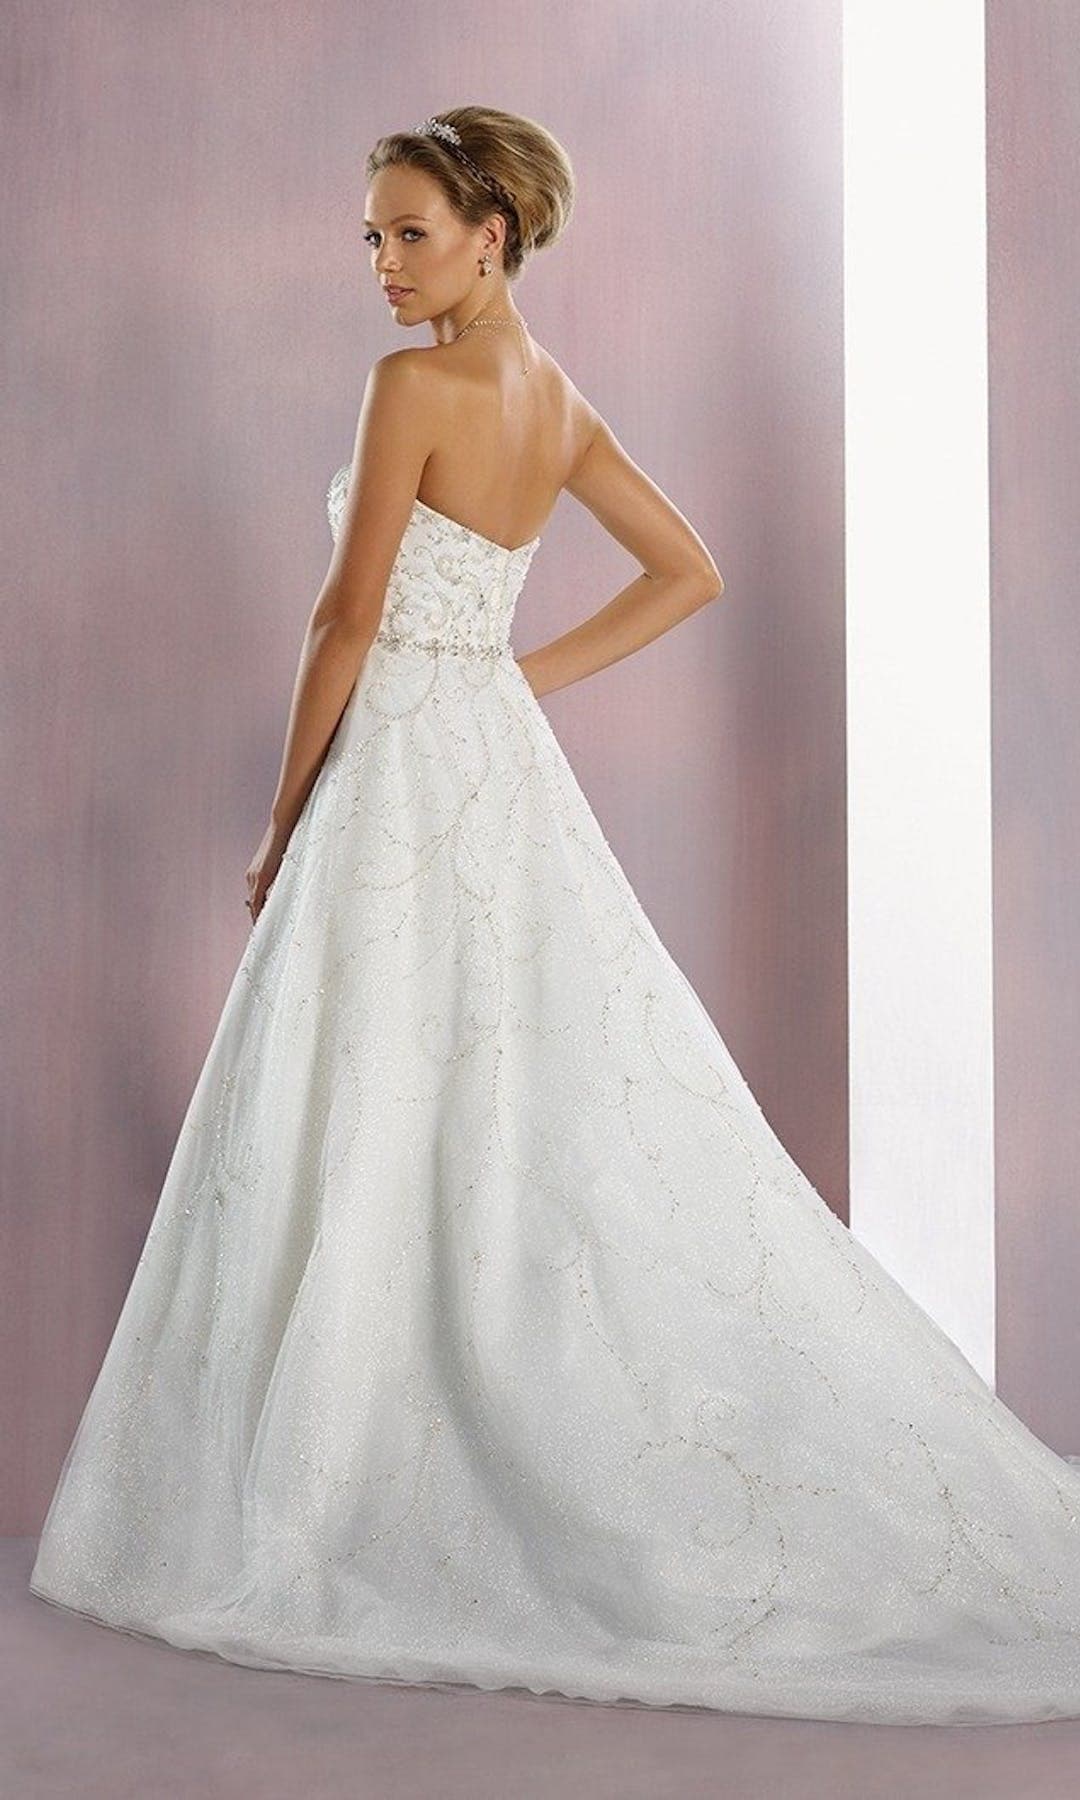 [For Rent ONLY] Cinderella Disney Fairy Tale Wedding Dress in Ivory /Silver (A-Line) - AA262 - Blossom Wedding